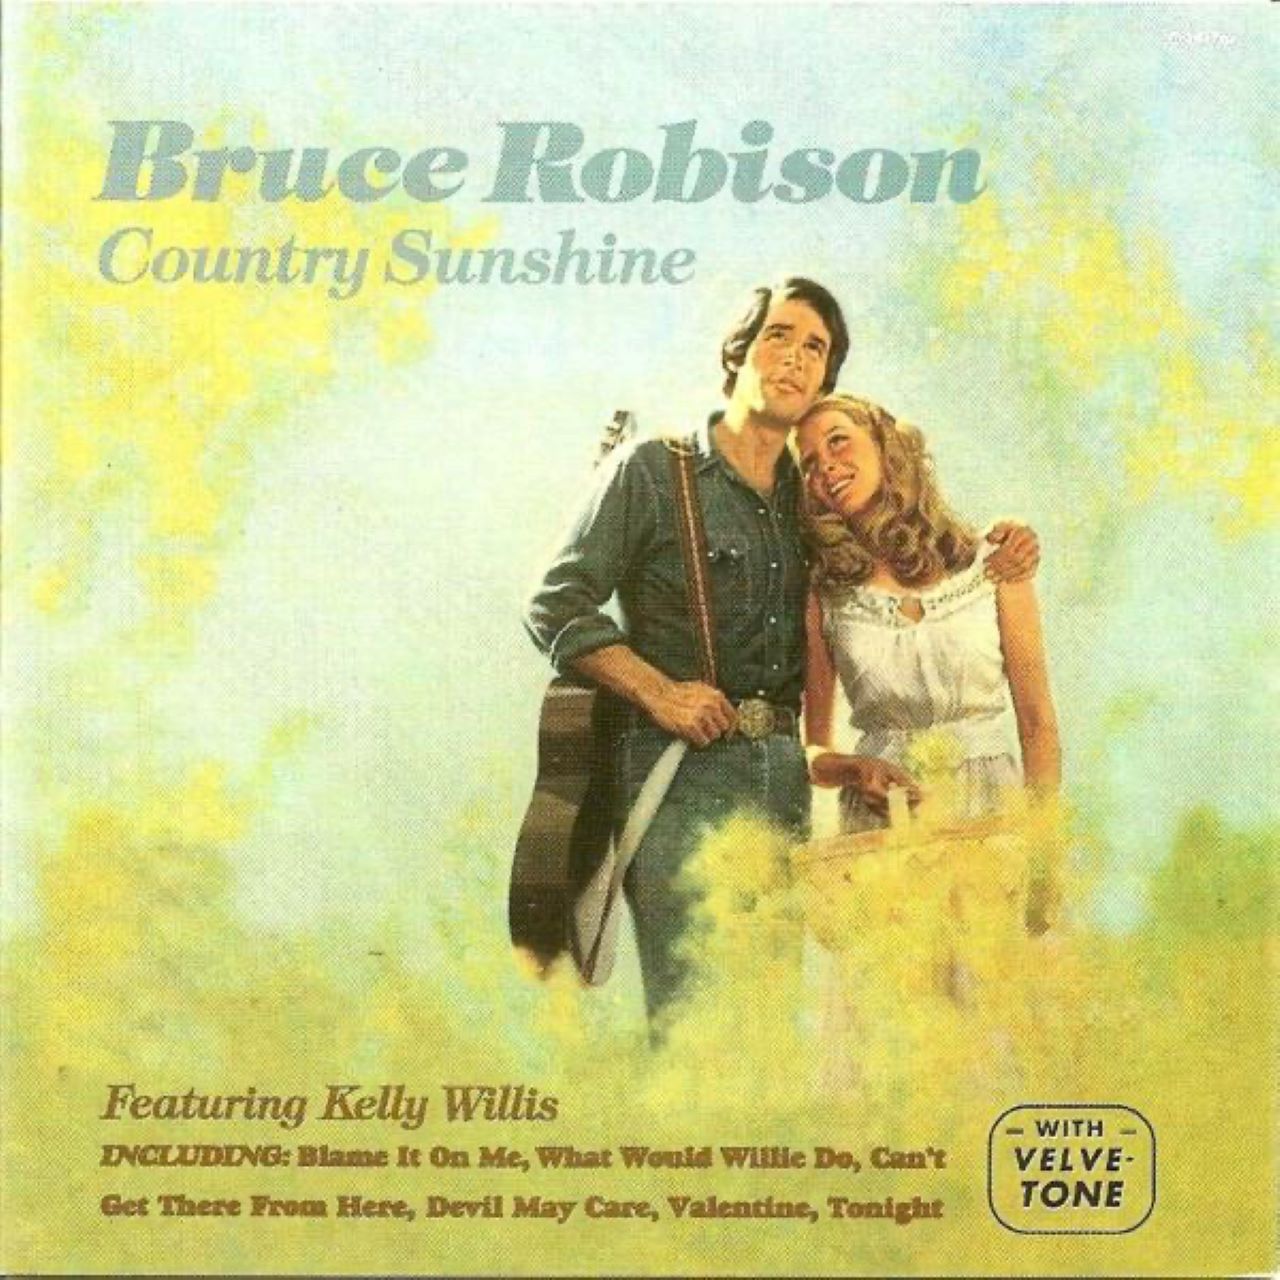 Bruce Robison - Country Sunshine cover album